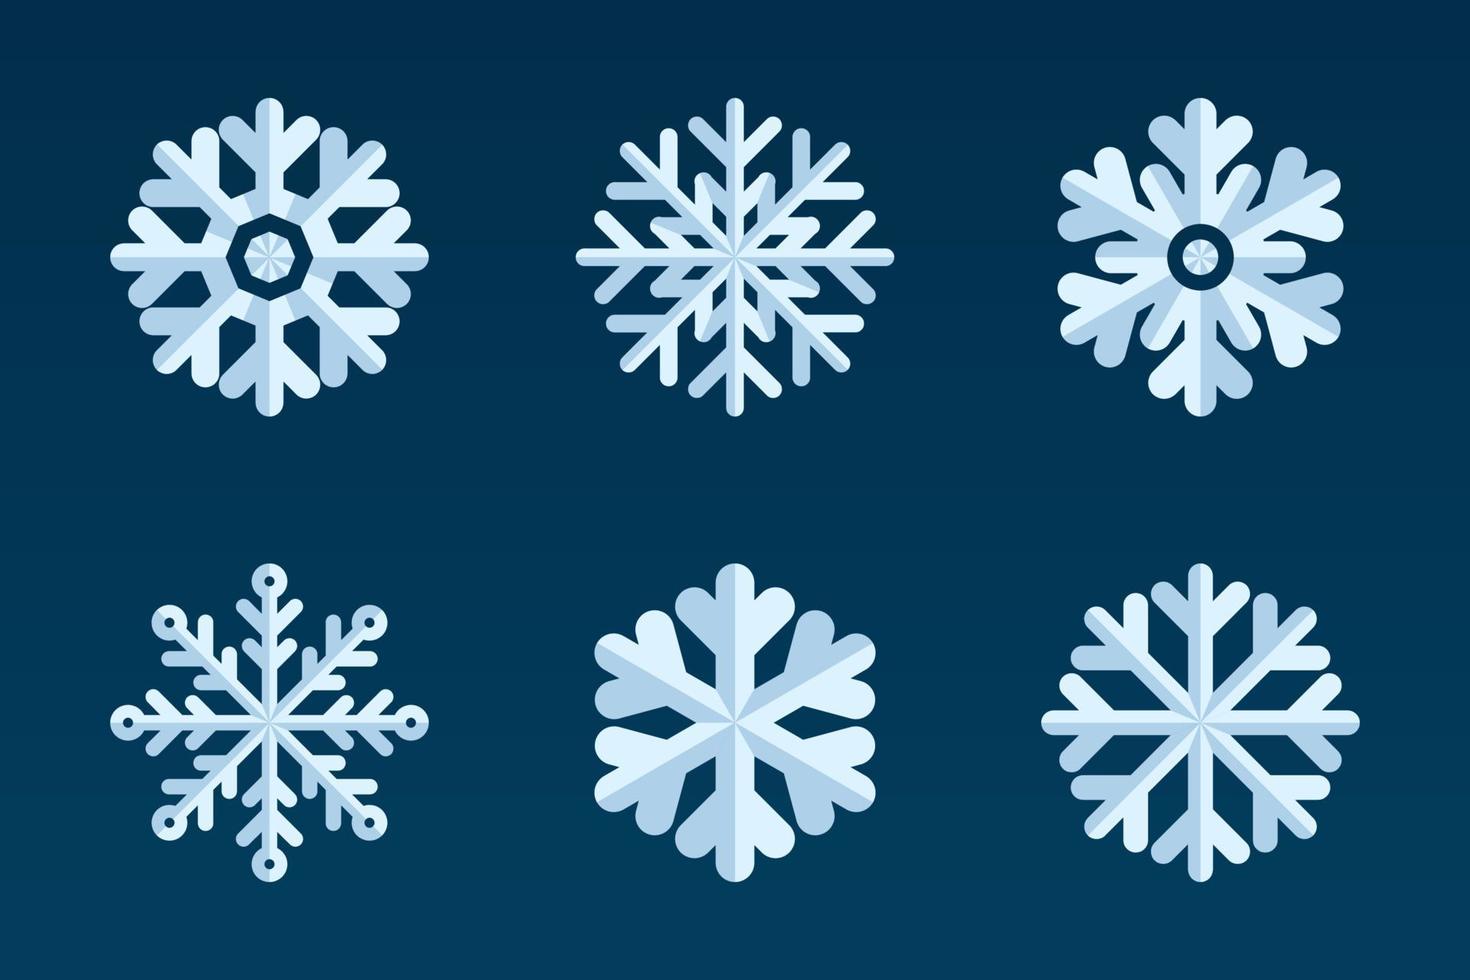 Snowflake Collection. Flat Style. Set of Christmas and Winter Traditional icons for logo, print, sticker, emblem, label, badge, greeting and invitation card design vector